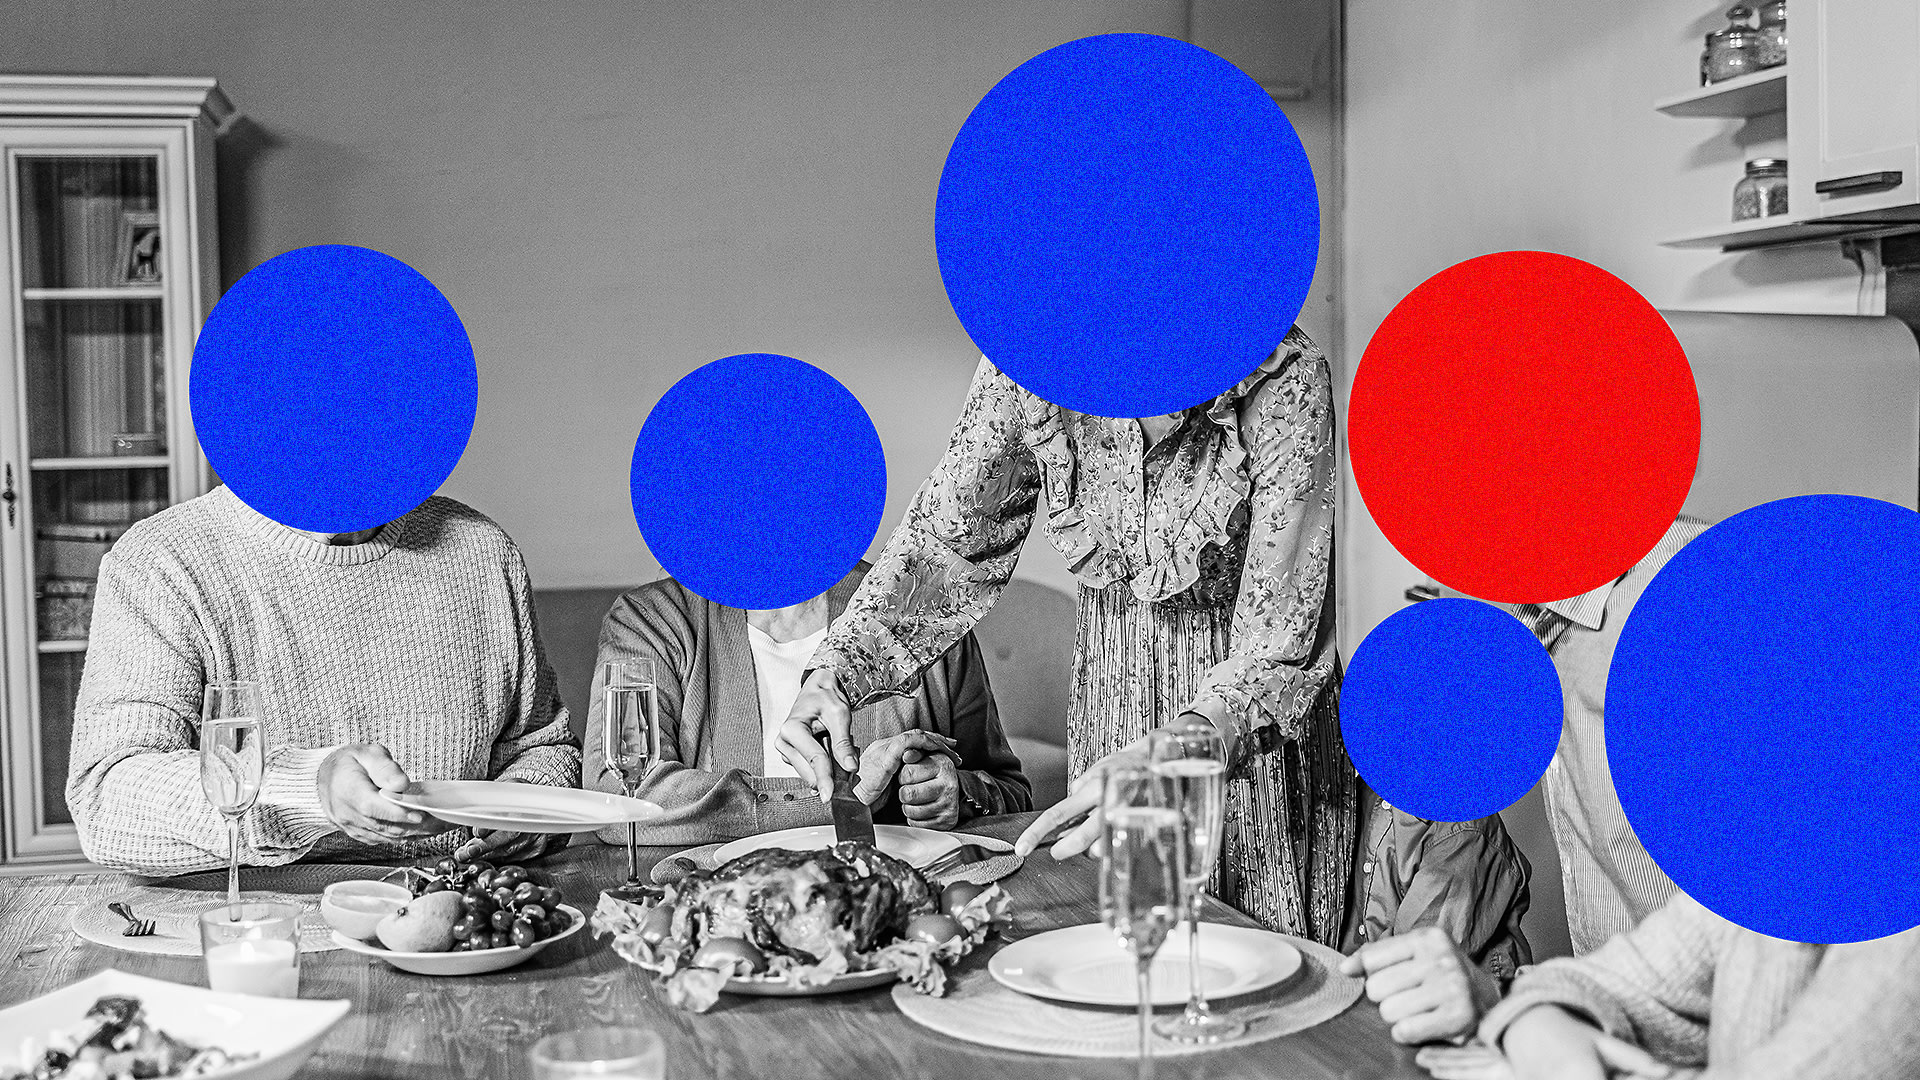 Delta variant: This online tool shows the chances someone at your Thanksgiving gathering has COVID-19